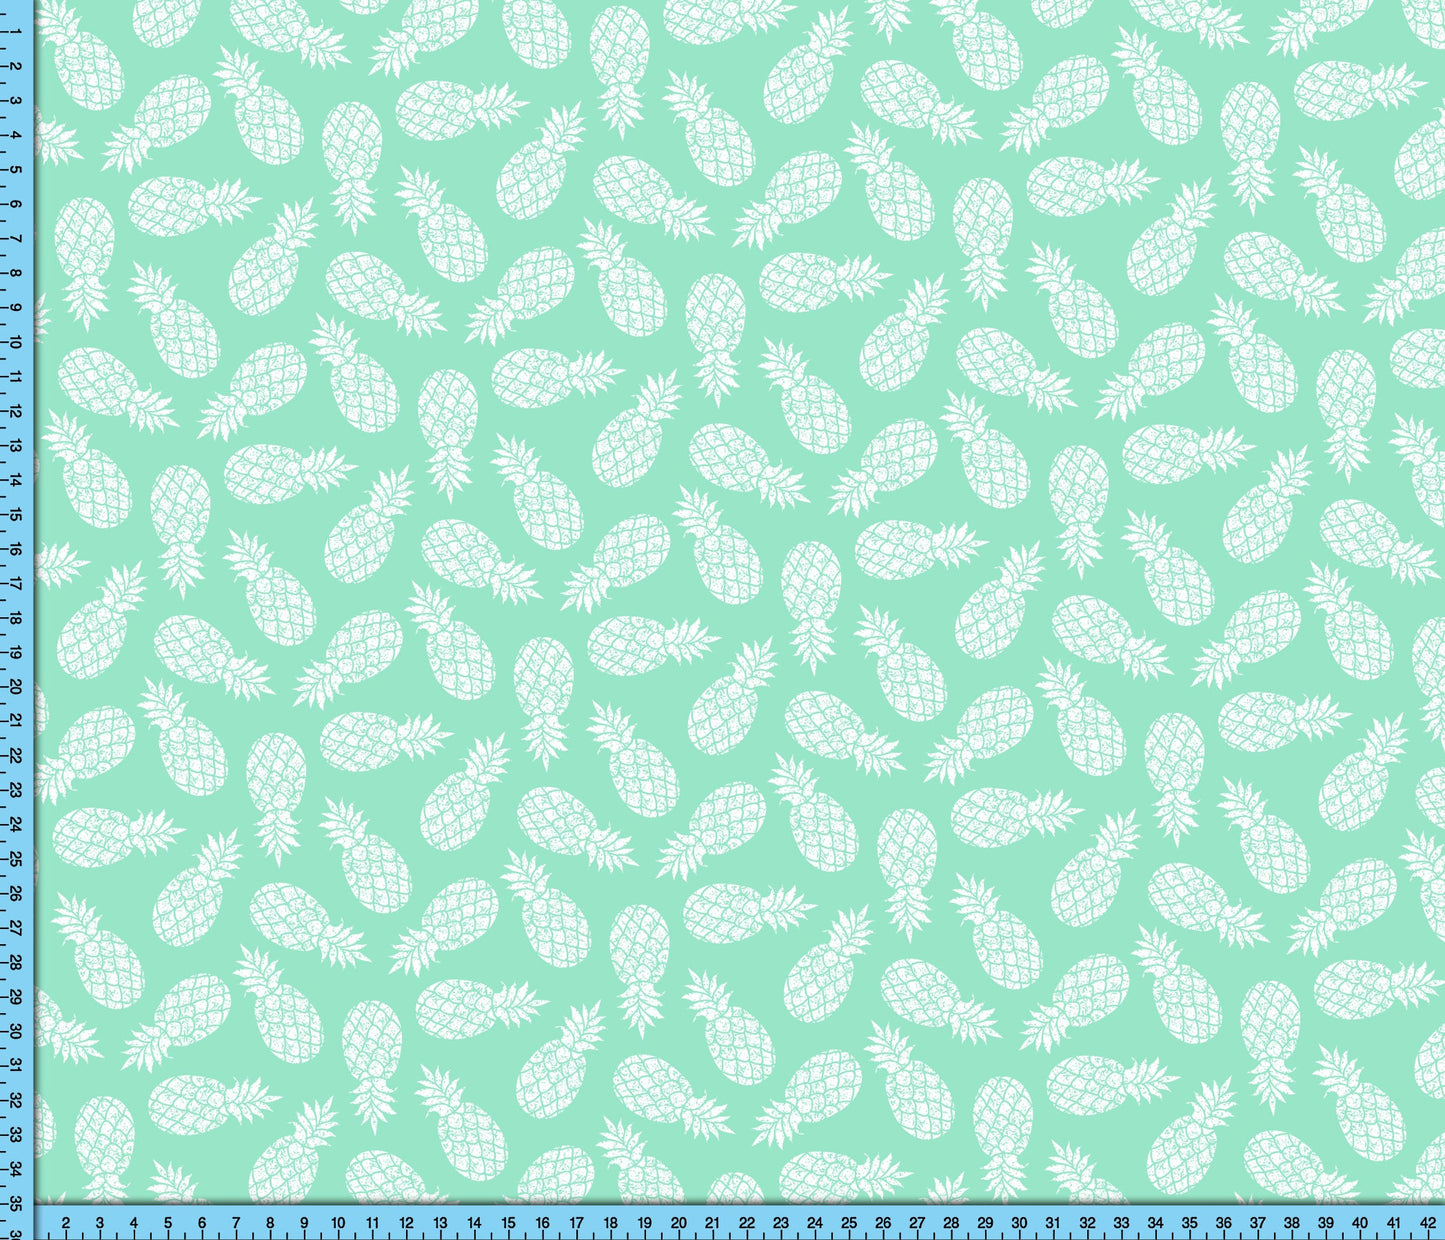 Turquoise Green Tropical Pineapple Fabric, Vintage Style Tropical Pattern print on choice of fabric By the Yard, Woodblock Etching Design